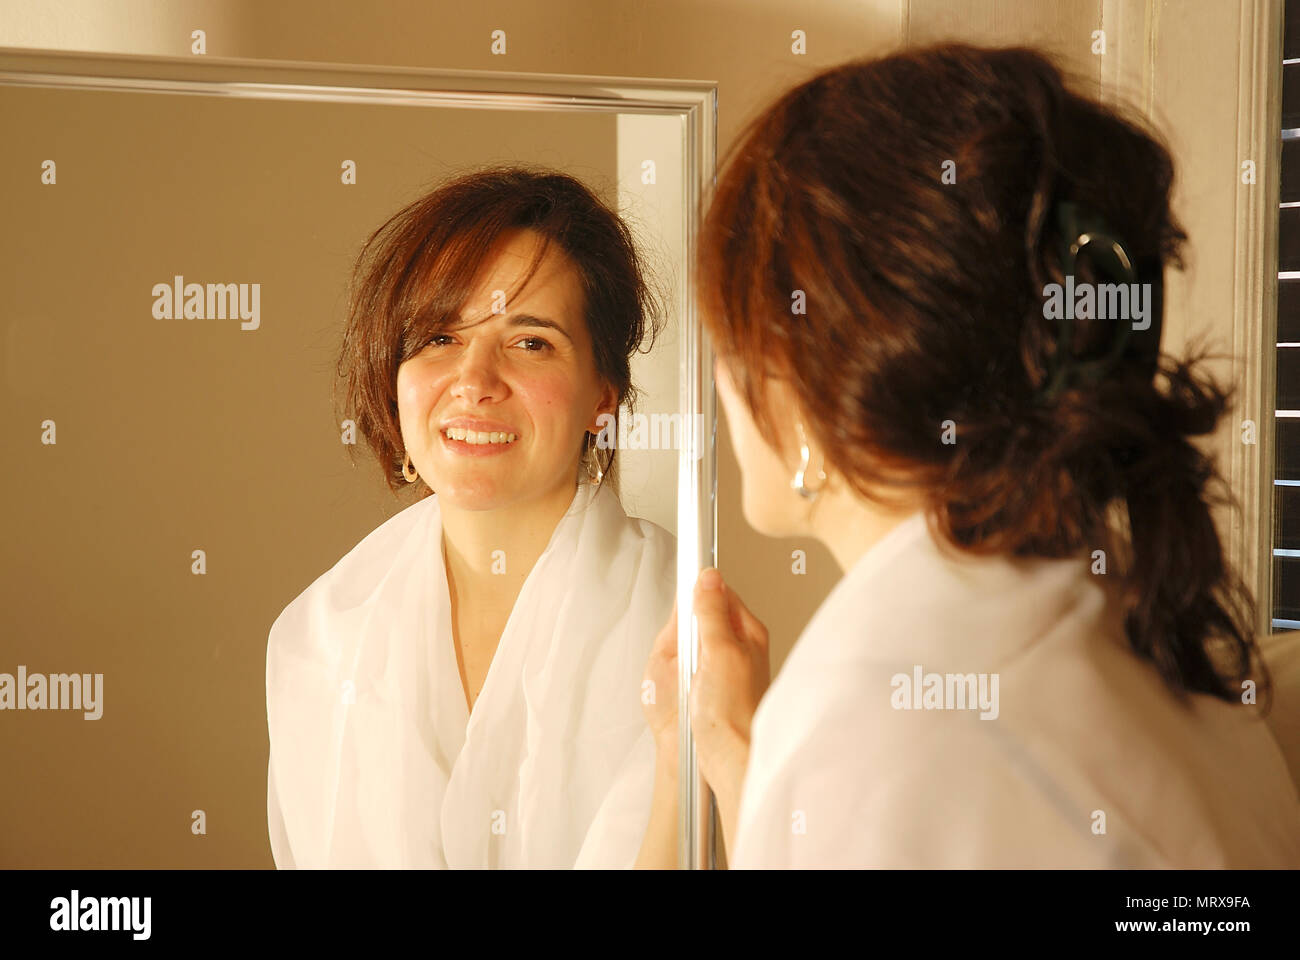 Portrait of woman looking at the camera from her image reflected on a mirror. Stock Photo